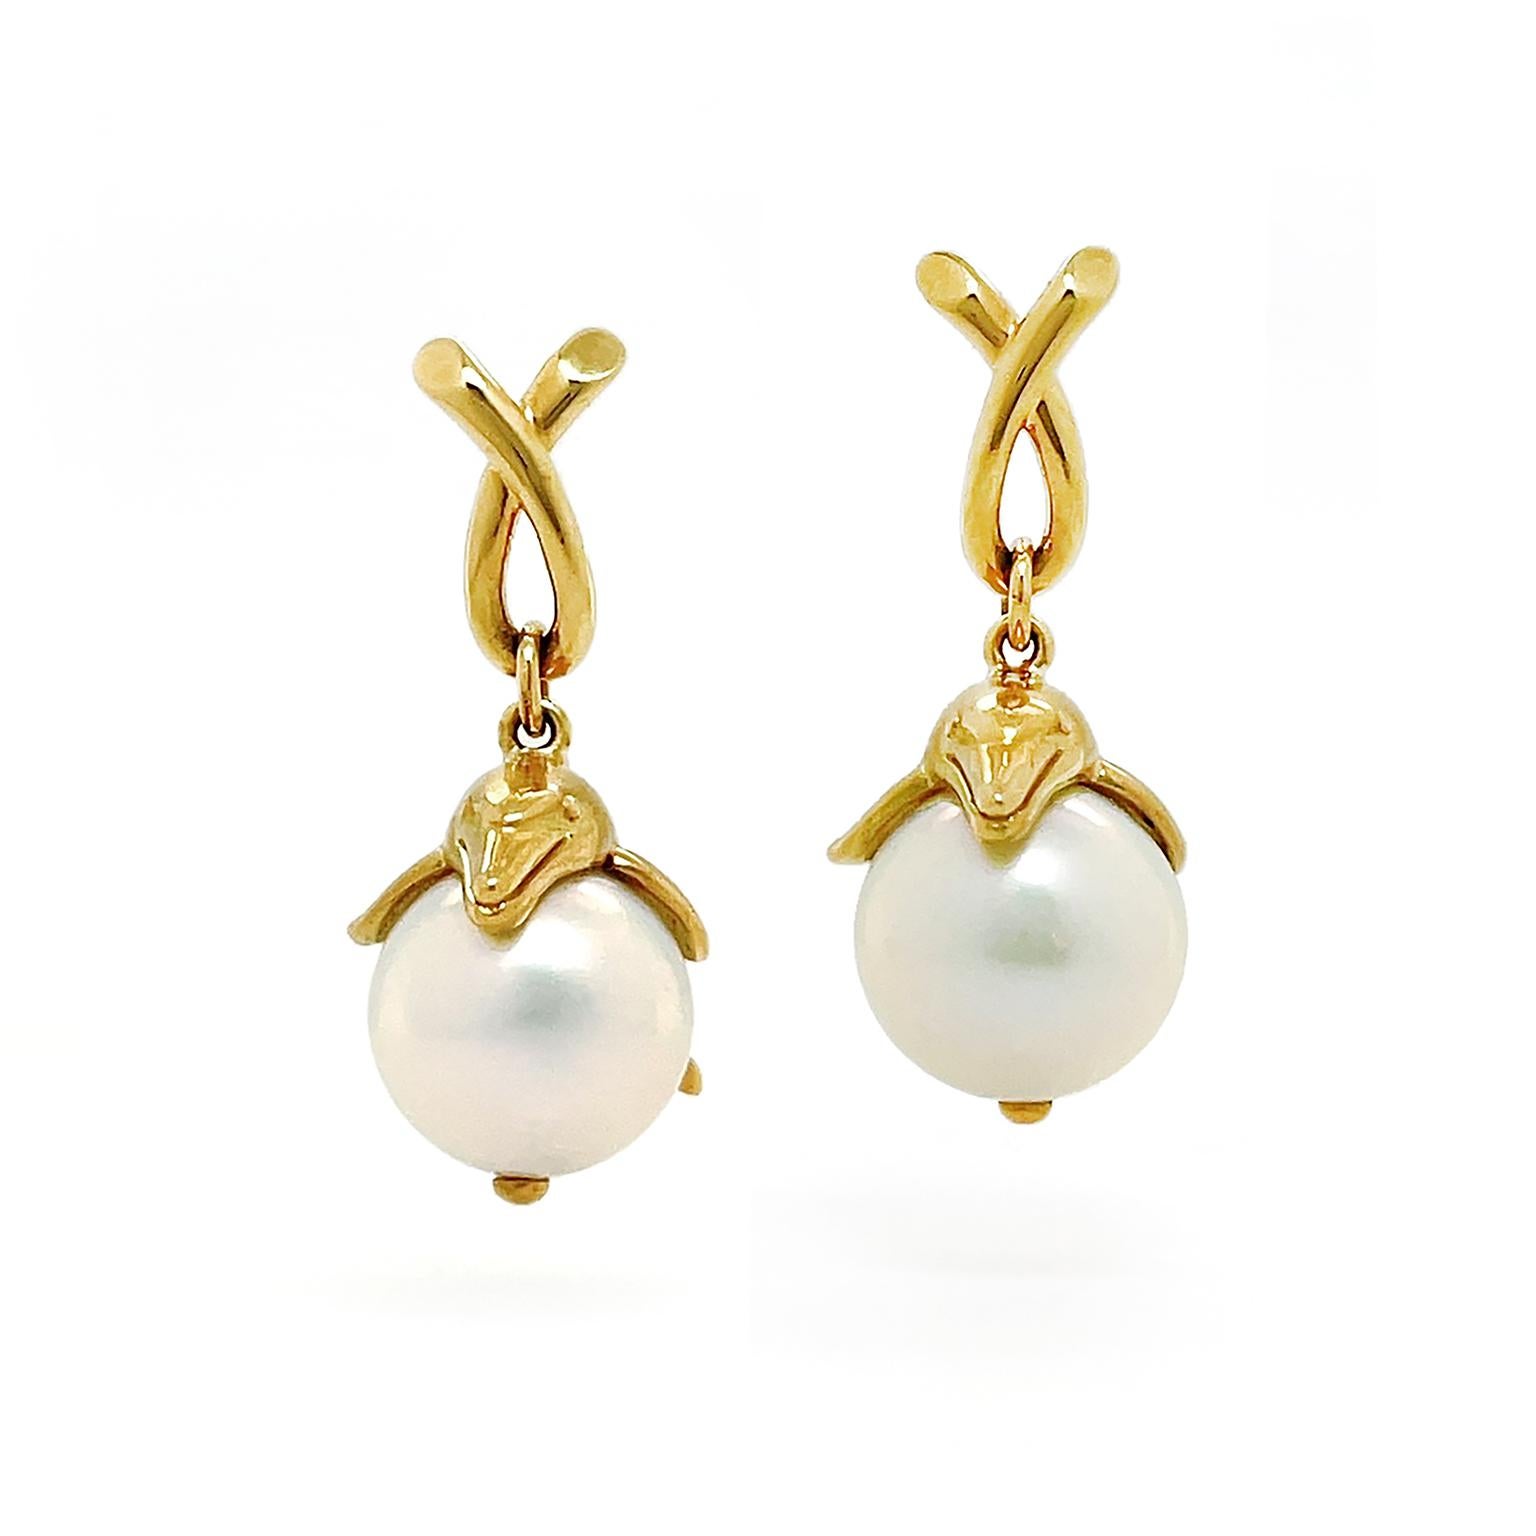 Dolphins produce a fanciful interpretation of pearl earrings. 18k yellow-gold dolphins drop from an overlapped gold loop. Detailing of the mammal includes its eyes and curved mouth. The position of the dolphin gives the illusion of leaping in midair